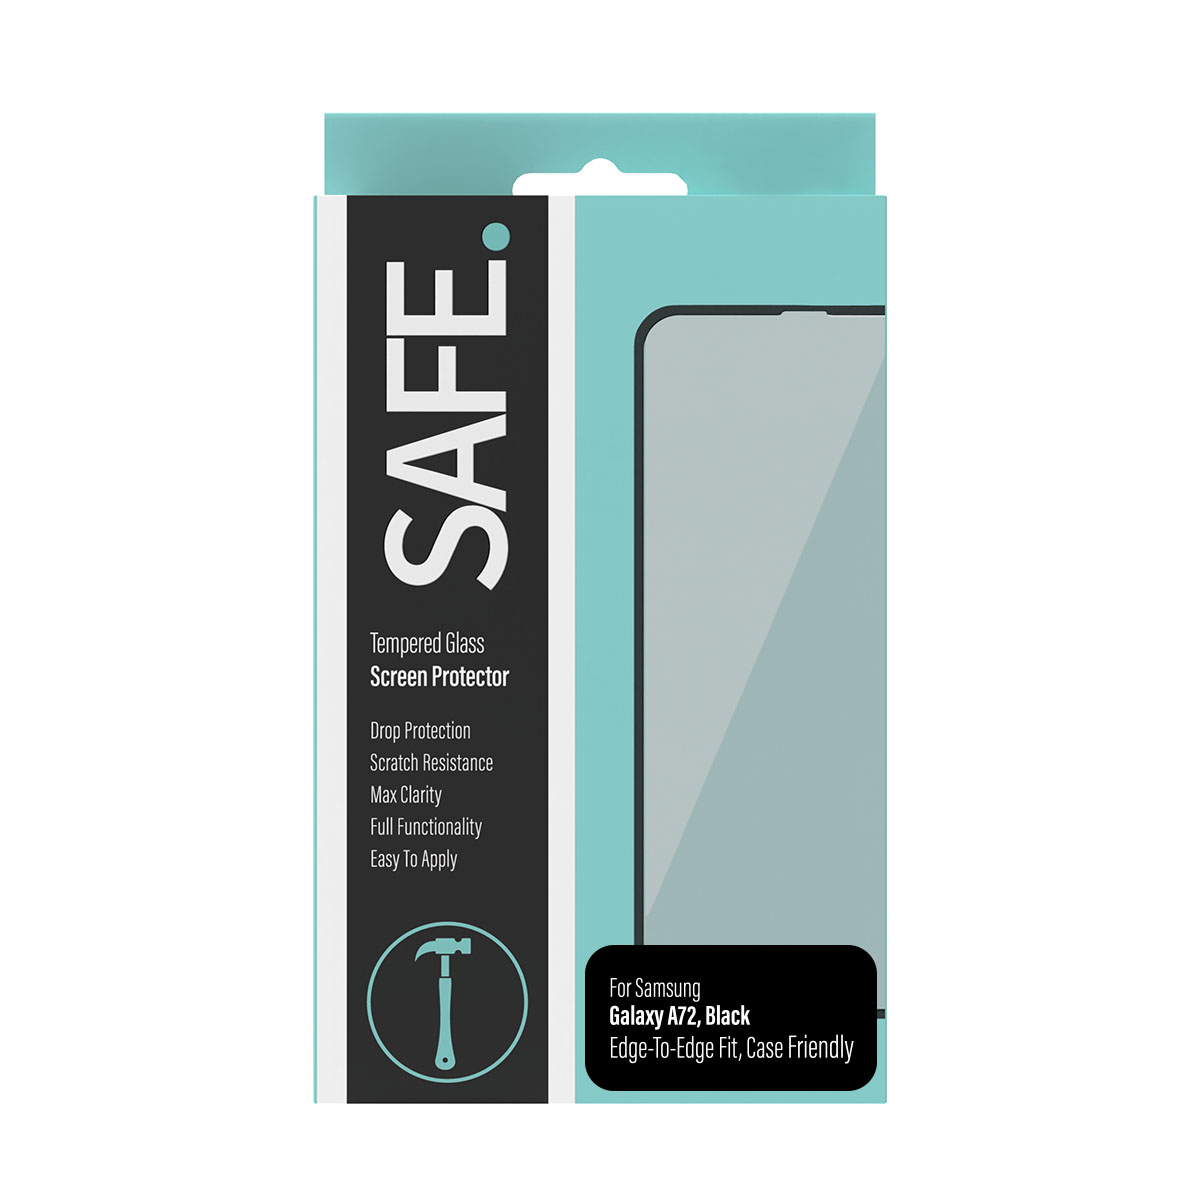 SAFE Samsung Galaxy A72 - Screen Protector  -  Drop Protective, Scratch Resistance, Max Clarity